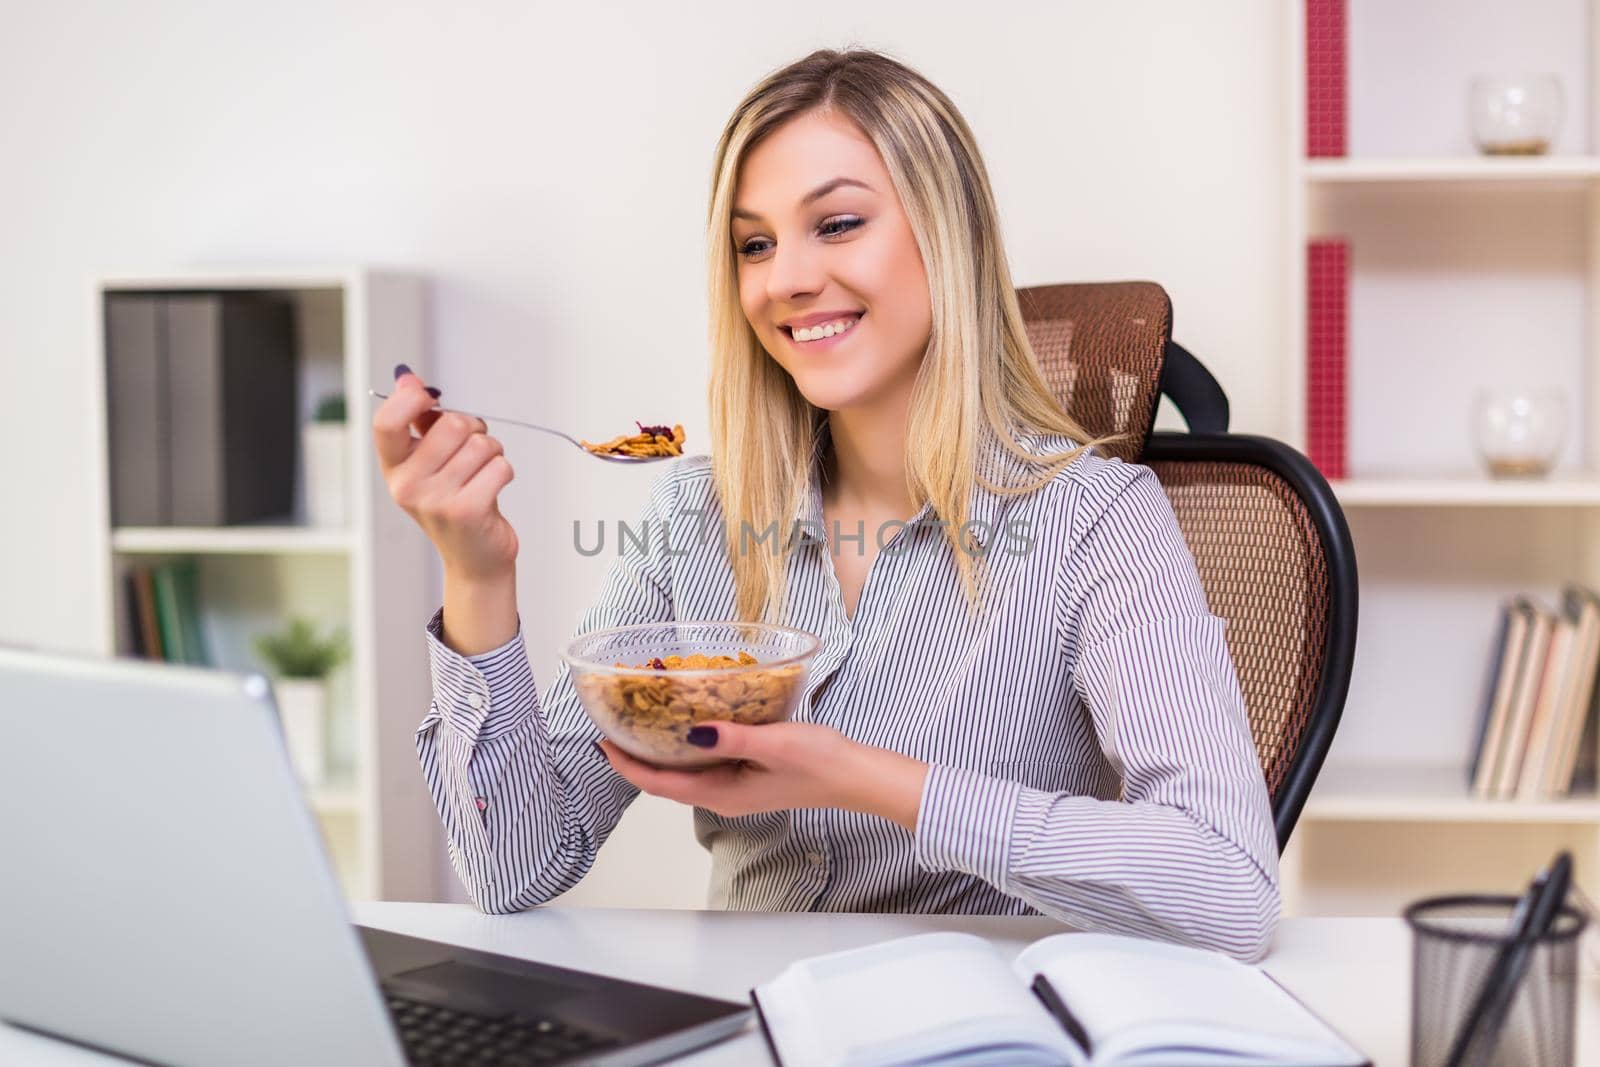 Beautiful businesswoman enjoys eating corn flakes for breakfast while working in her office.